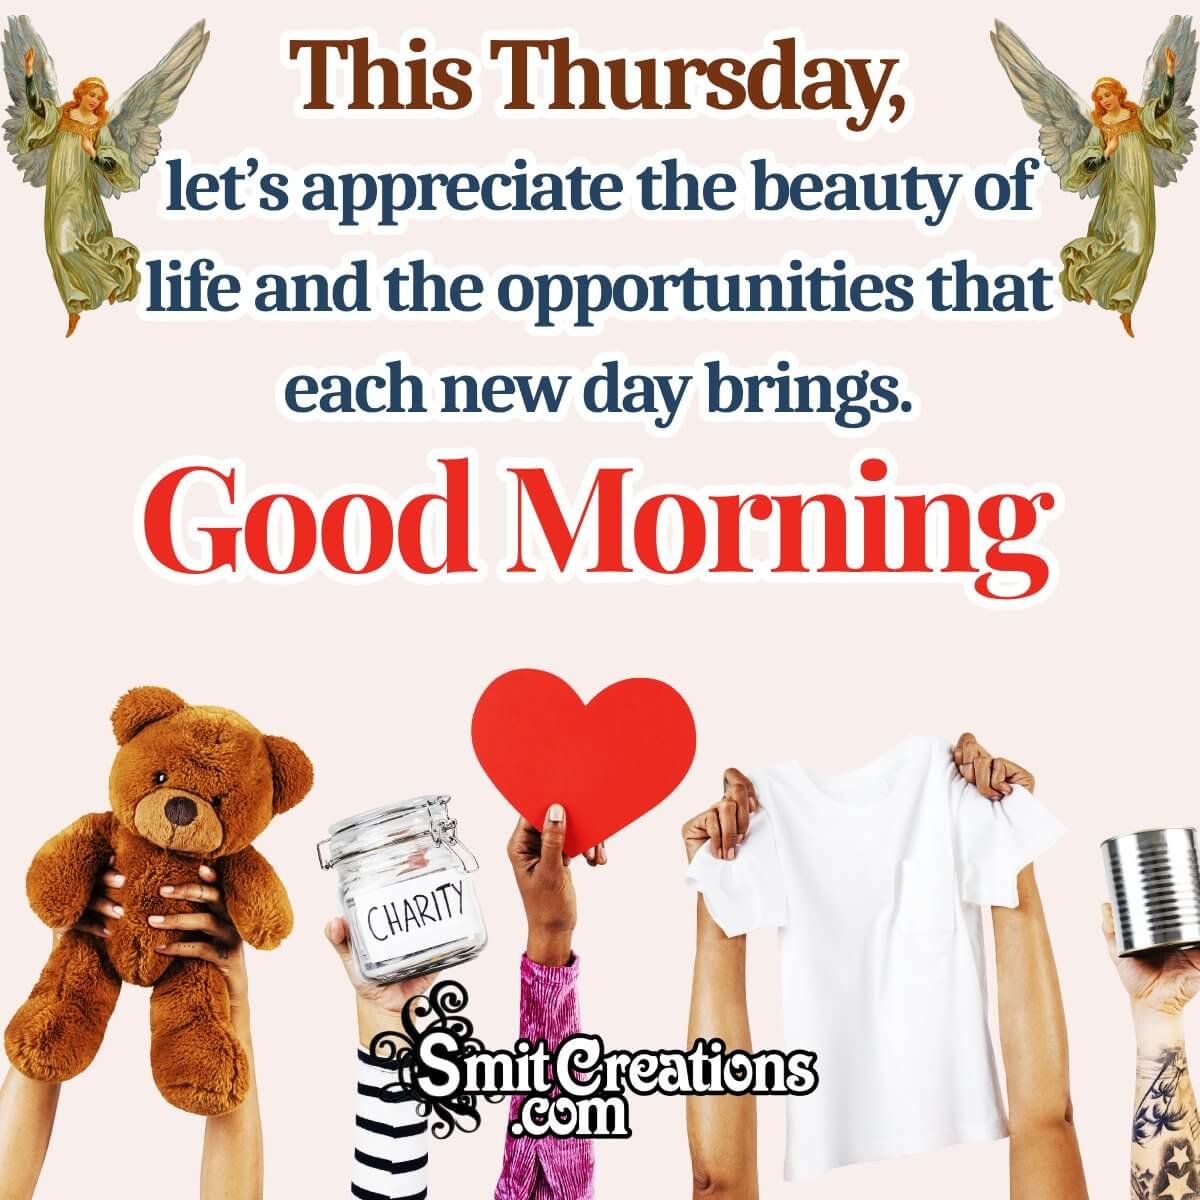 Thursday Morning Message Greeting Pic